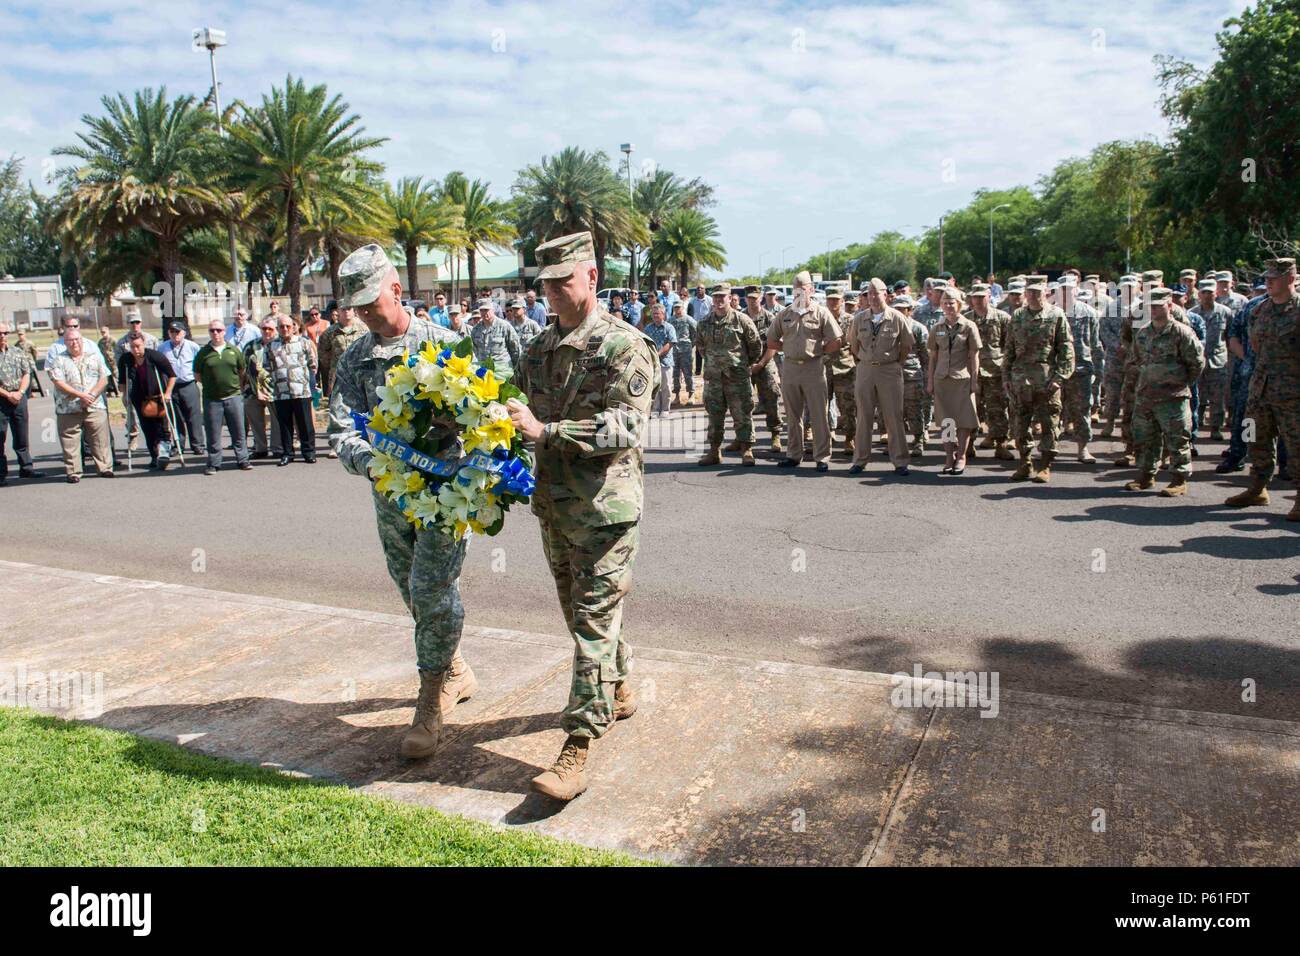 U.S. Army Brig. Gen. Mark Spindler, the Defense POW/MIA Accounting Agency deputy director, and U.S. Army Sgt. Maj. Michael Swam, DPAA senior enlisted advisor, carry a wreath as part of a memorial service held on Joint Base Pearl Harbor Hickam, April 7, to honor men killed in a helicopter crash, April 7, 2001 in Quang Binh, Vietnam. The 16 men were on an advanced party as part of a personnel recovery joint field activity. DPAA's mission to provide the fullest possible accounting of missing personnel to their families and the nation. (DoD photo by MC1 Vladimir Potapenko/Released) Stock Photo